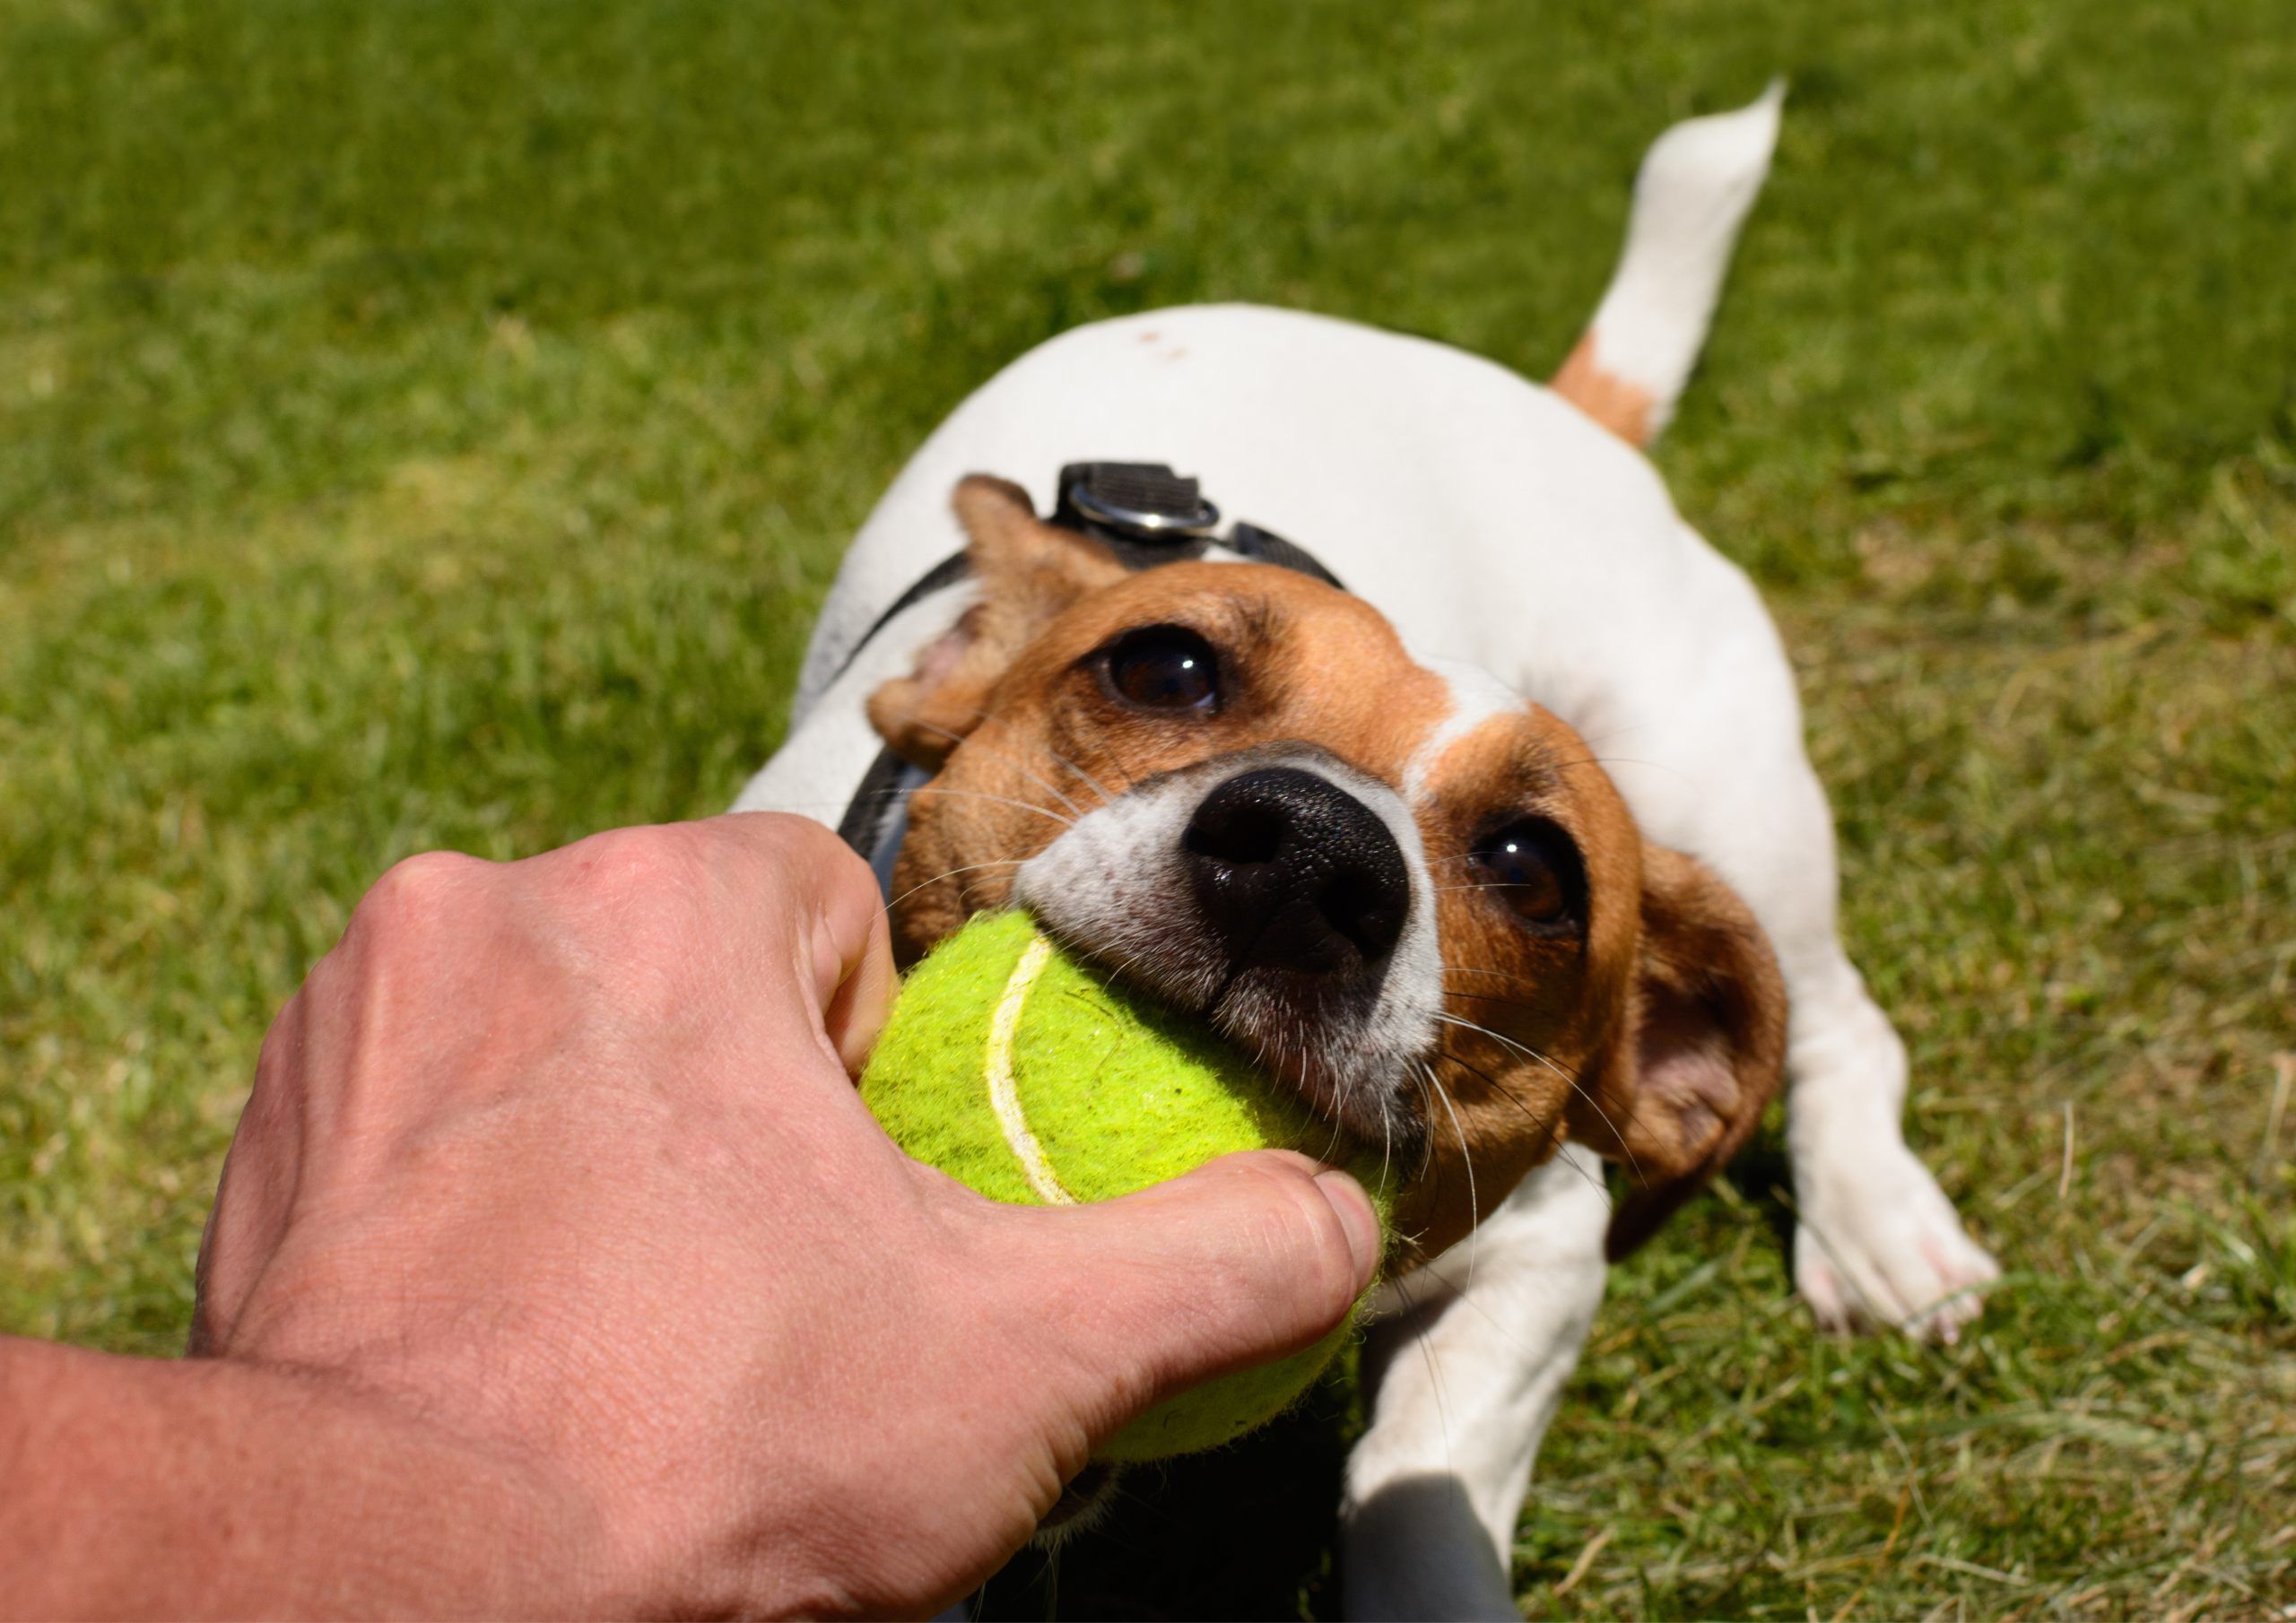 Jack Russel with a yellow tennis ball in hand, the owner is also holding the ball